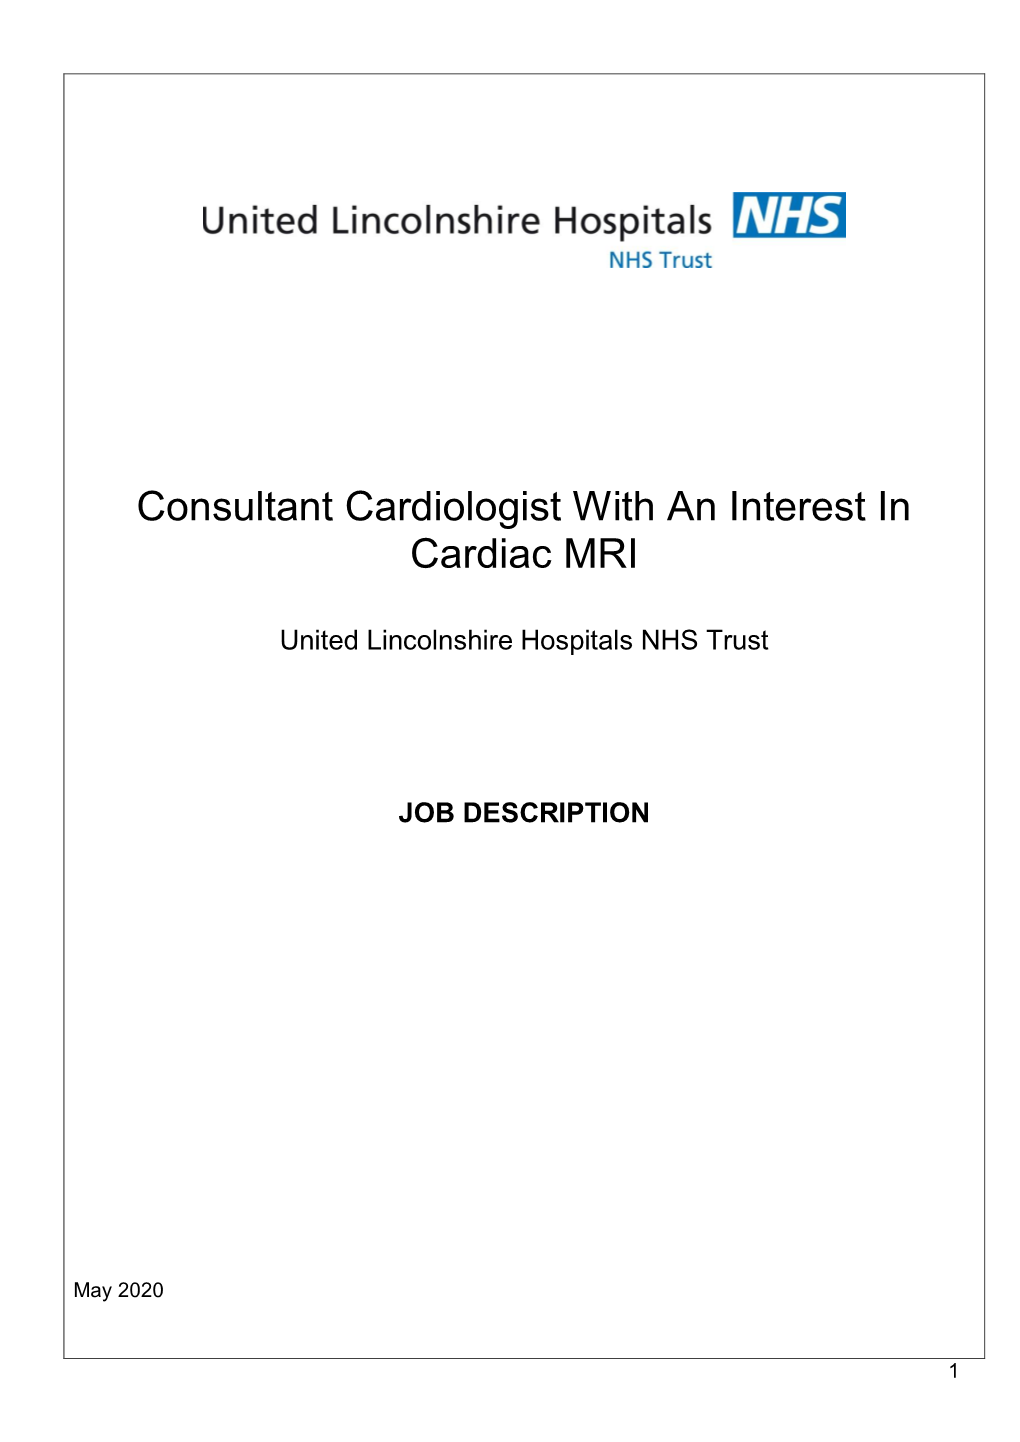 Consultant Cardiologist with an Interest in Cardiac MRI